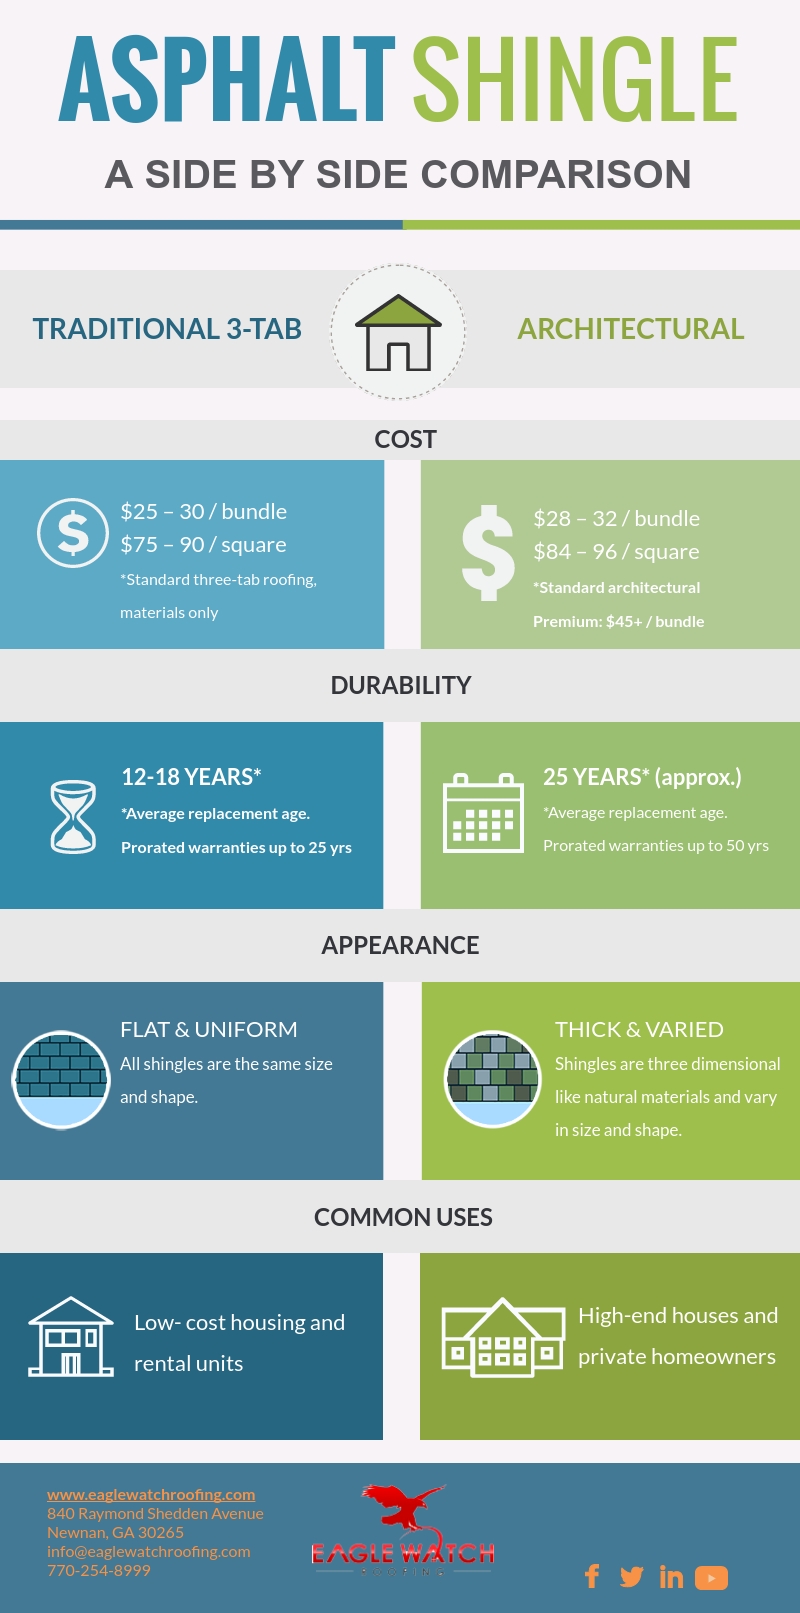 Things to Consider Before Installing an Asphalt Shingle Roof [infographic]